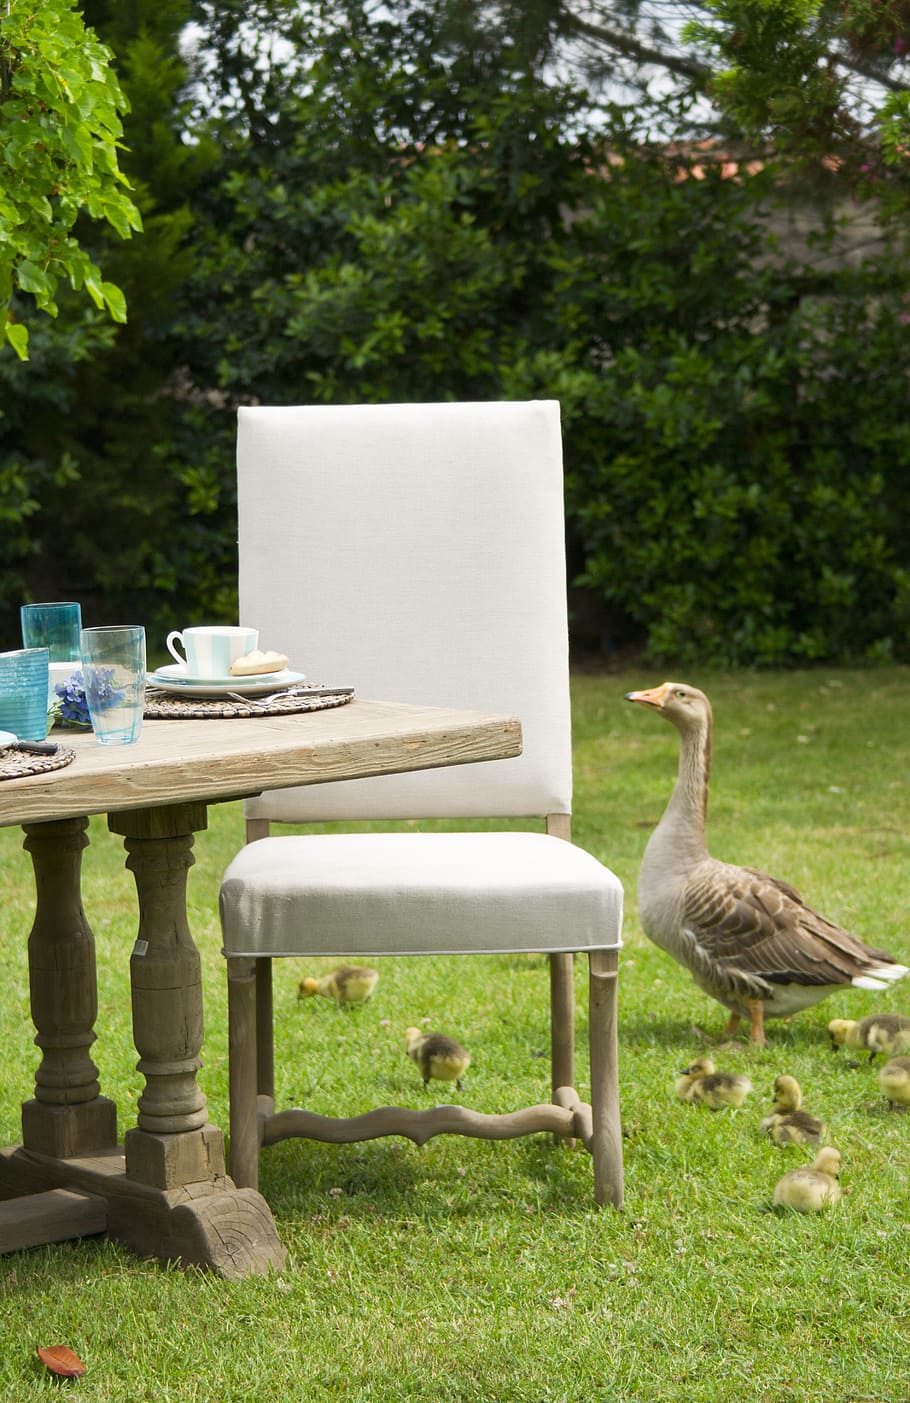 white padded chair, Duck, Nature, Grass, Green, Green, Table, grass, green, table, puppies, family